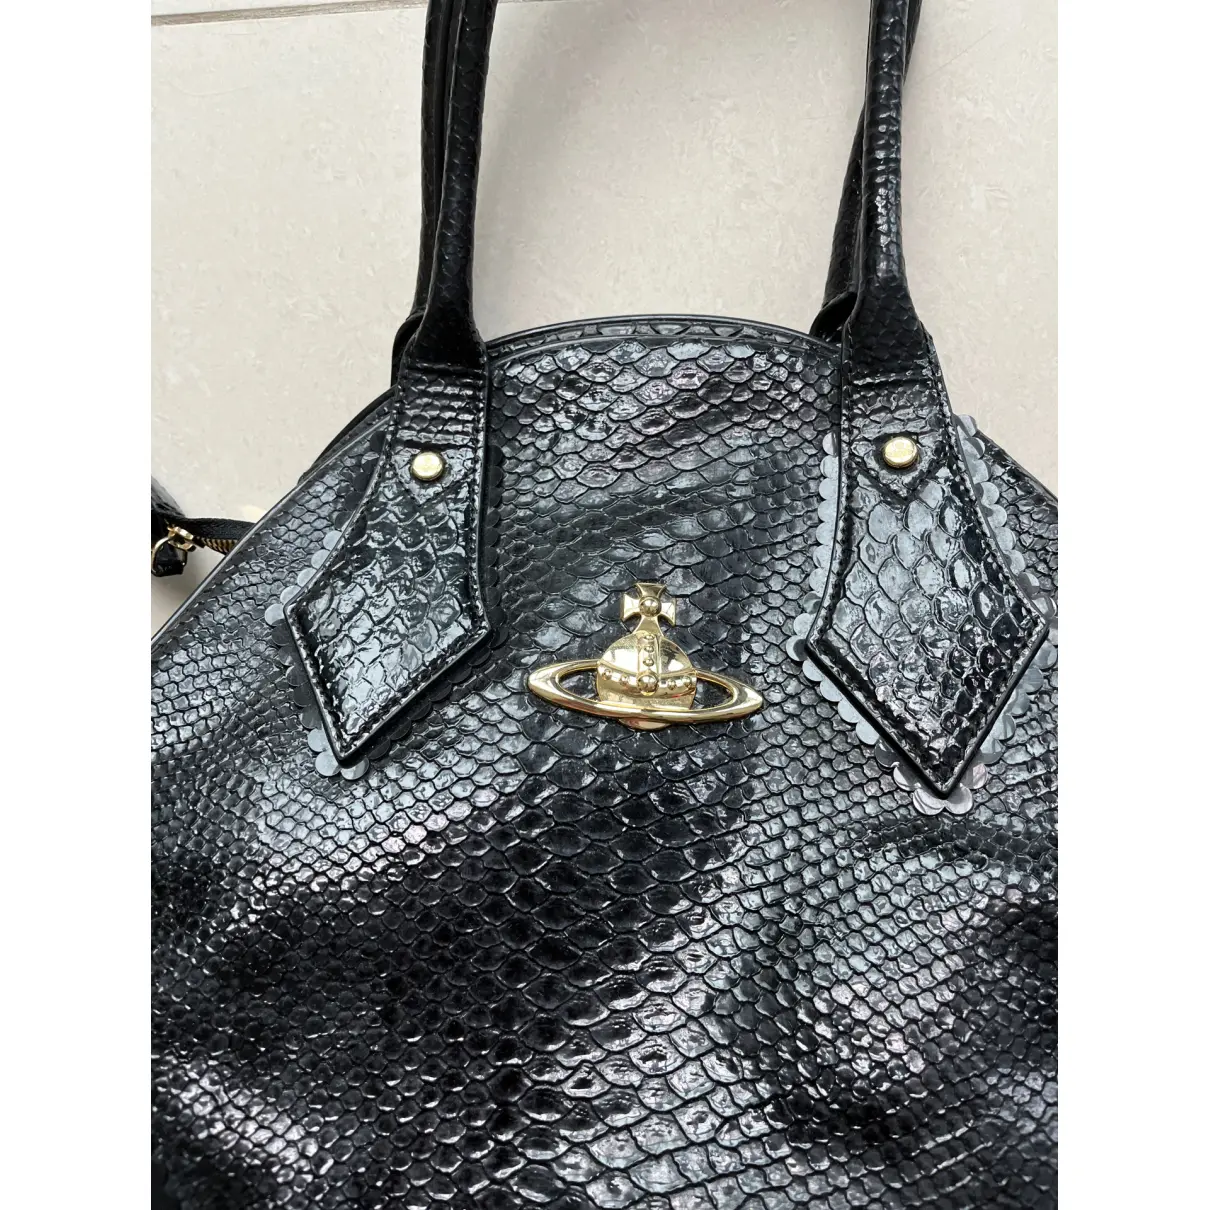 Buy Vivienne Westwood Anglomania Leather 48h bag online